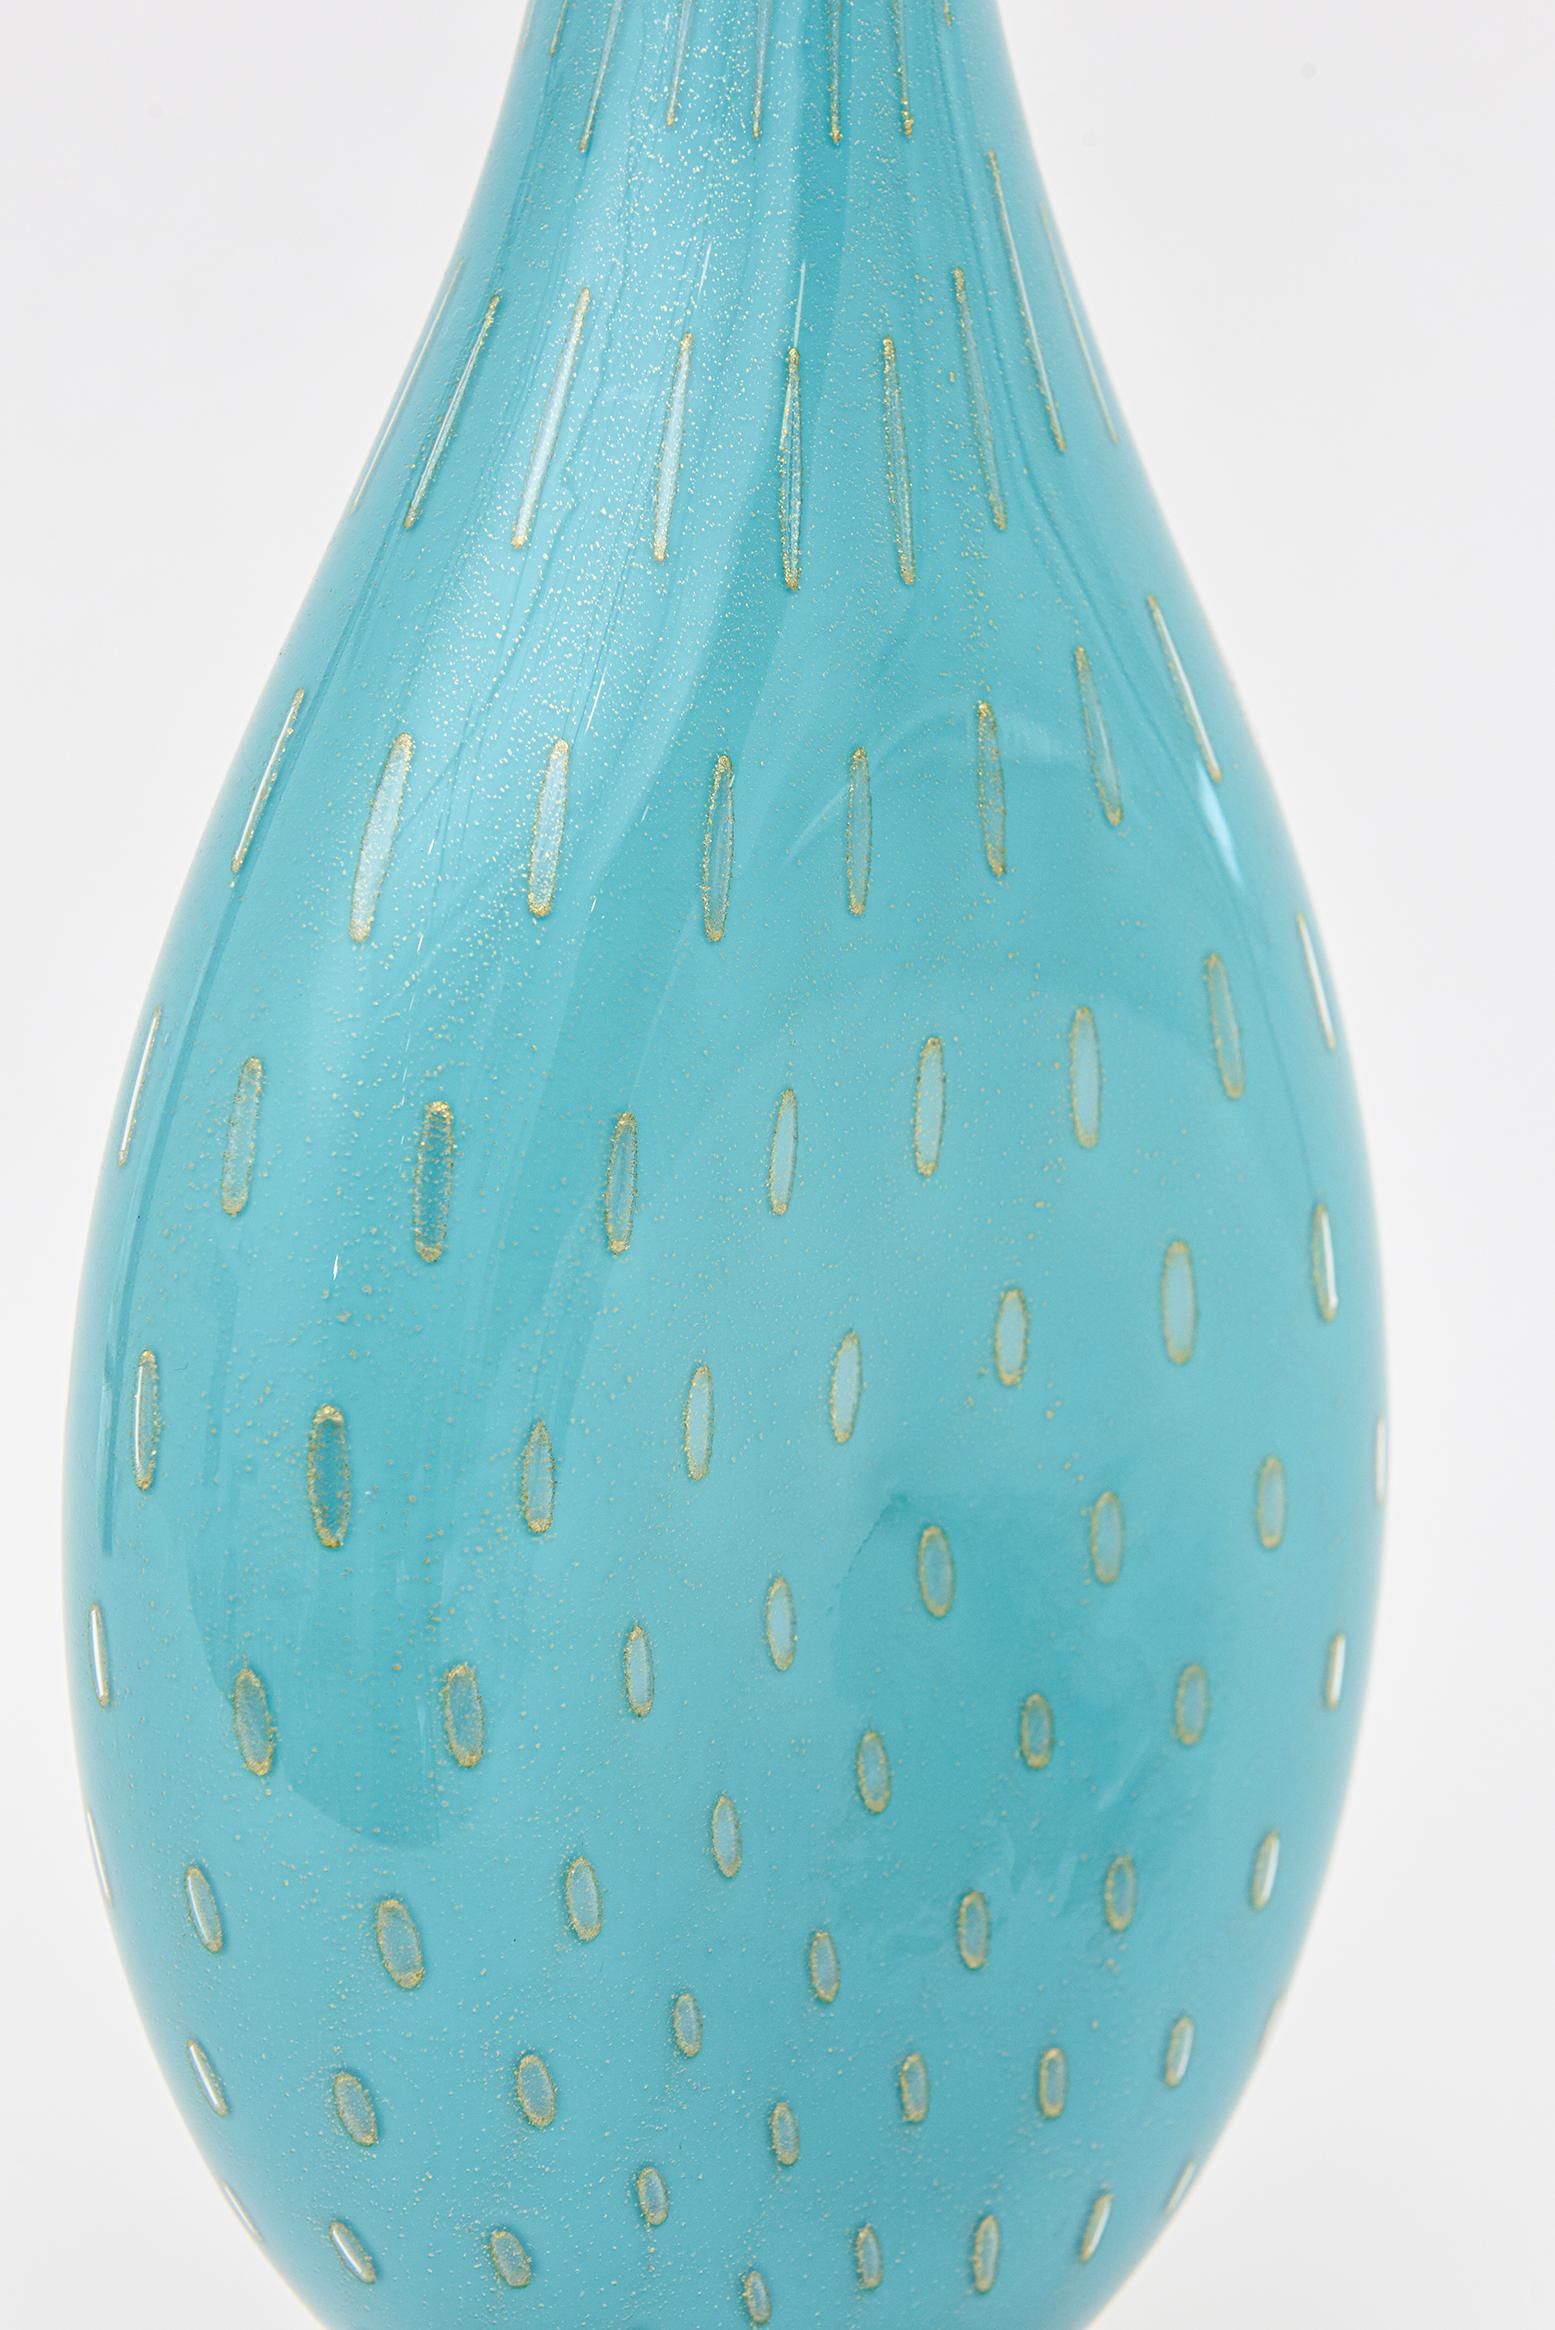 Mid-Century Modern Vintage Barovier e Toso Murano Turquoise Glass Vessel Bottle With Gold Droplets For Sale